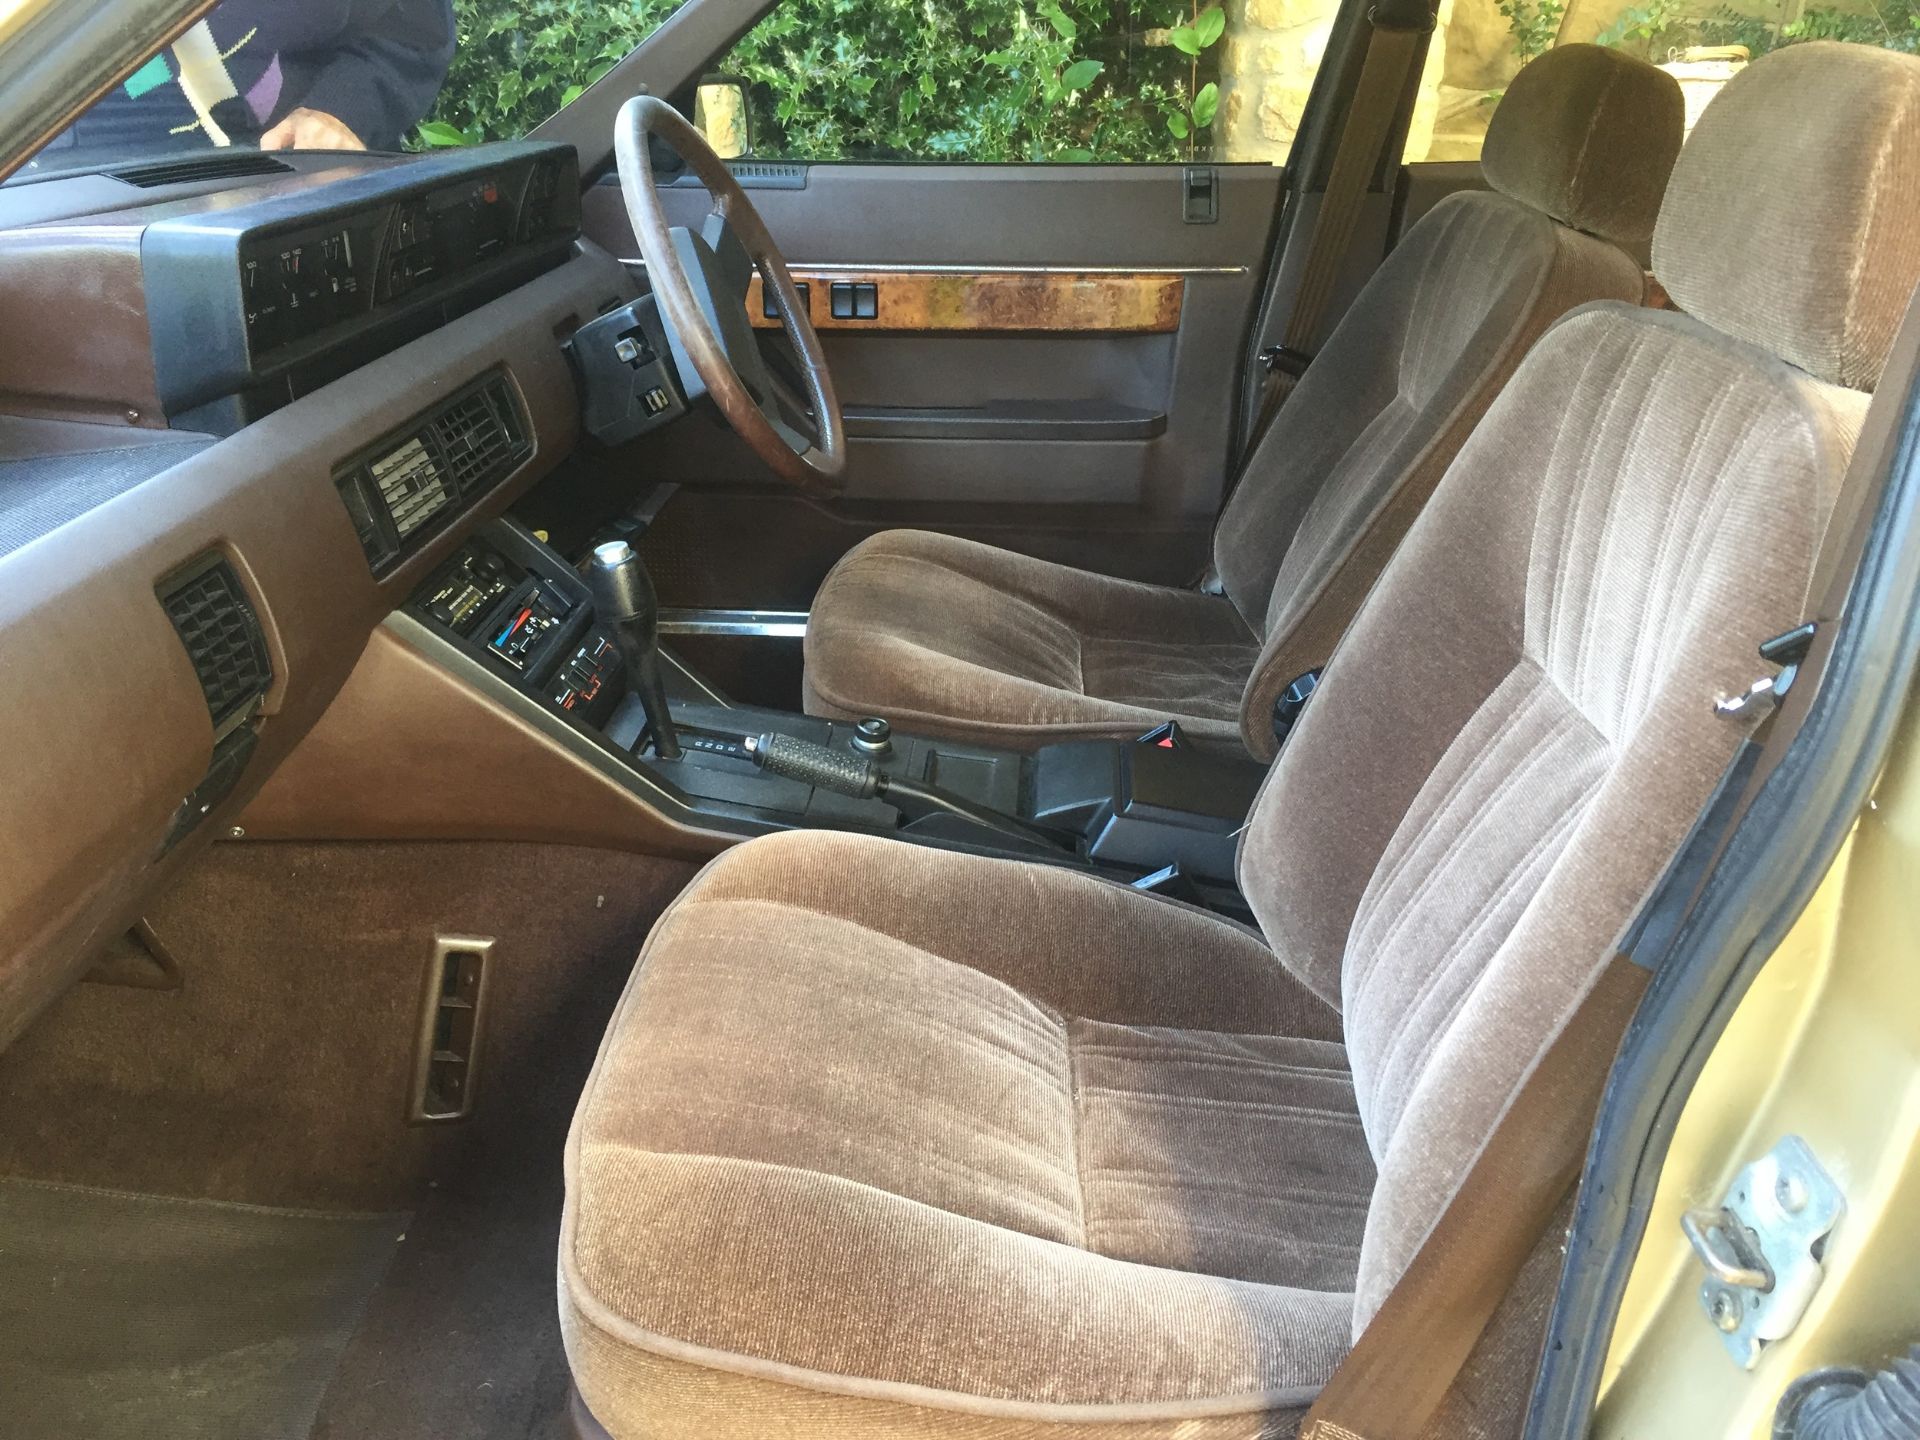 1984 Rover SD1 2300S Registration number A907 KDU Champagne Gold metallic Automatic Low miles - Image 9 of 14